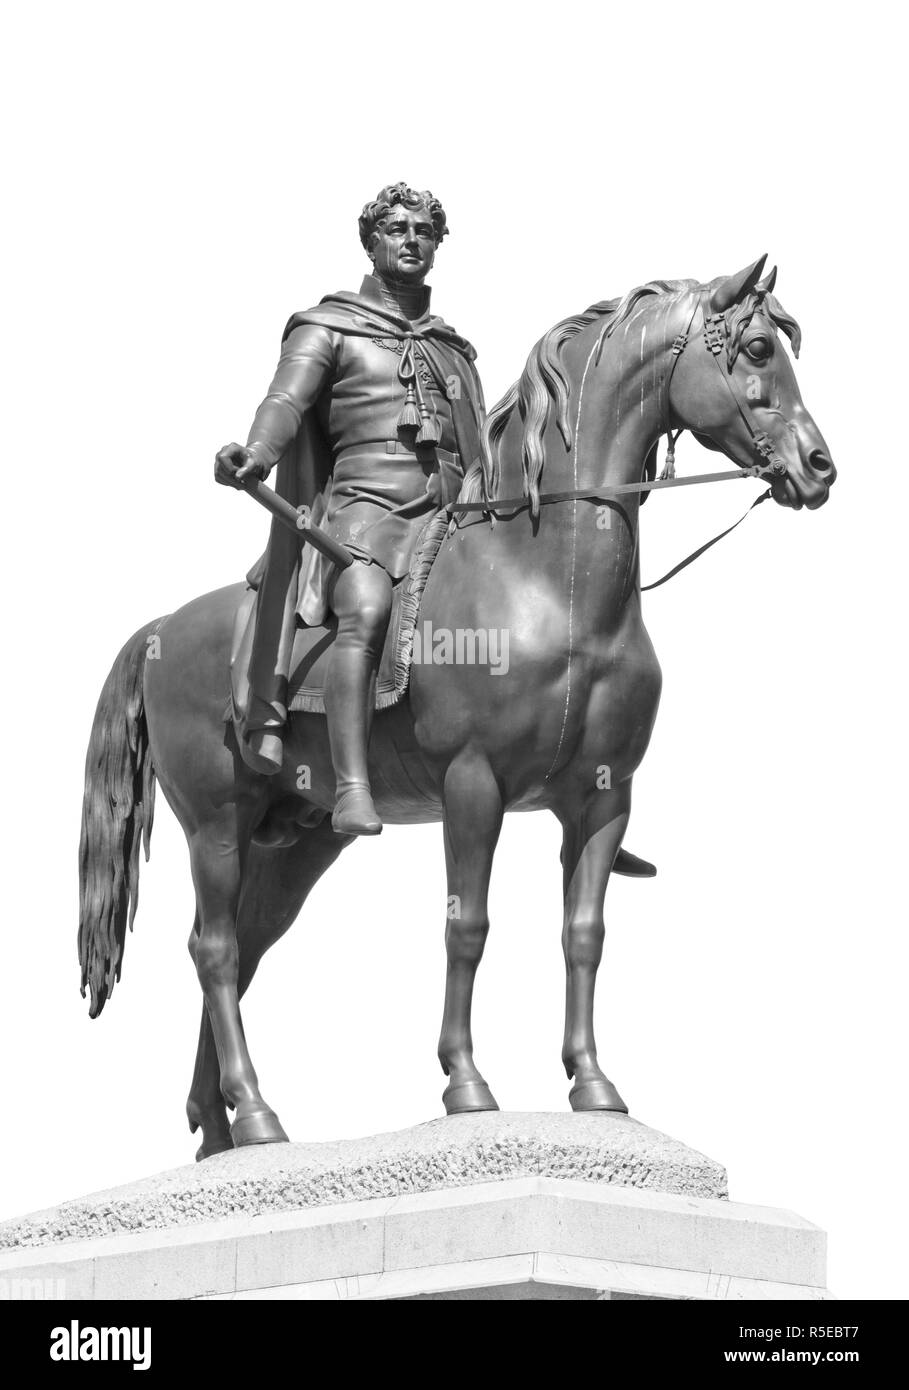 Statue in Trafalgar Square, London,UK, of George 4th King of England from 1820-1830. Stock Photo